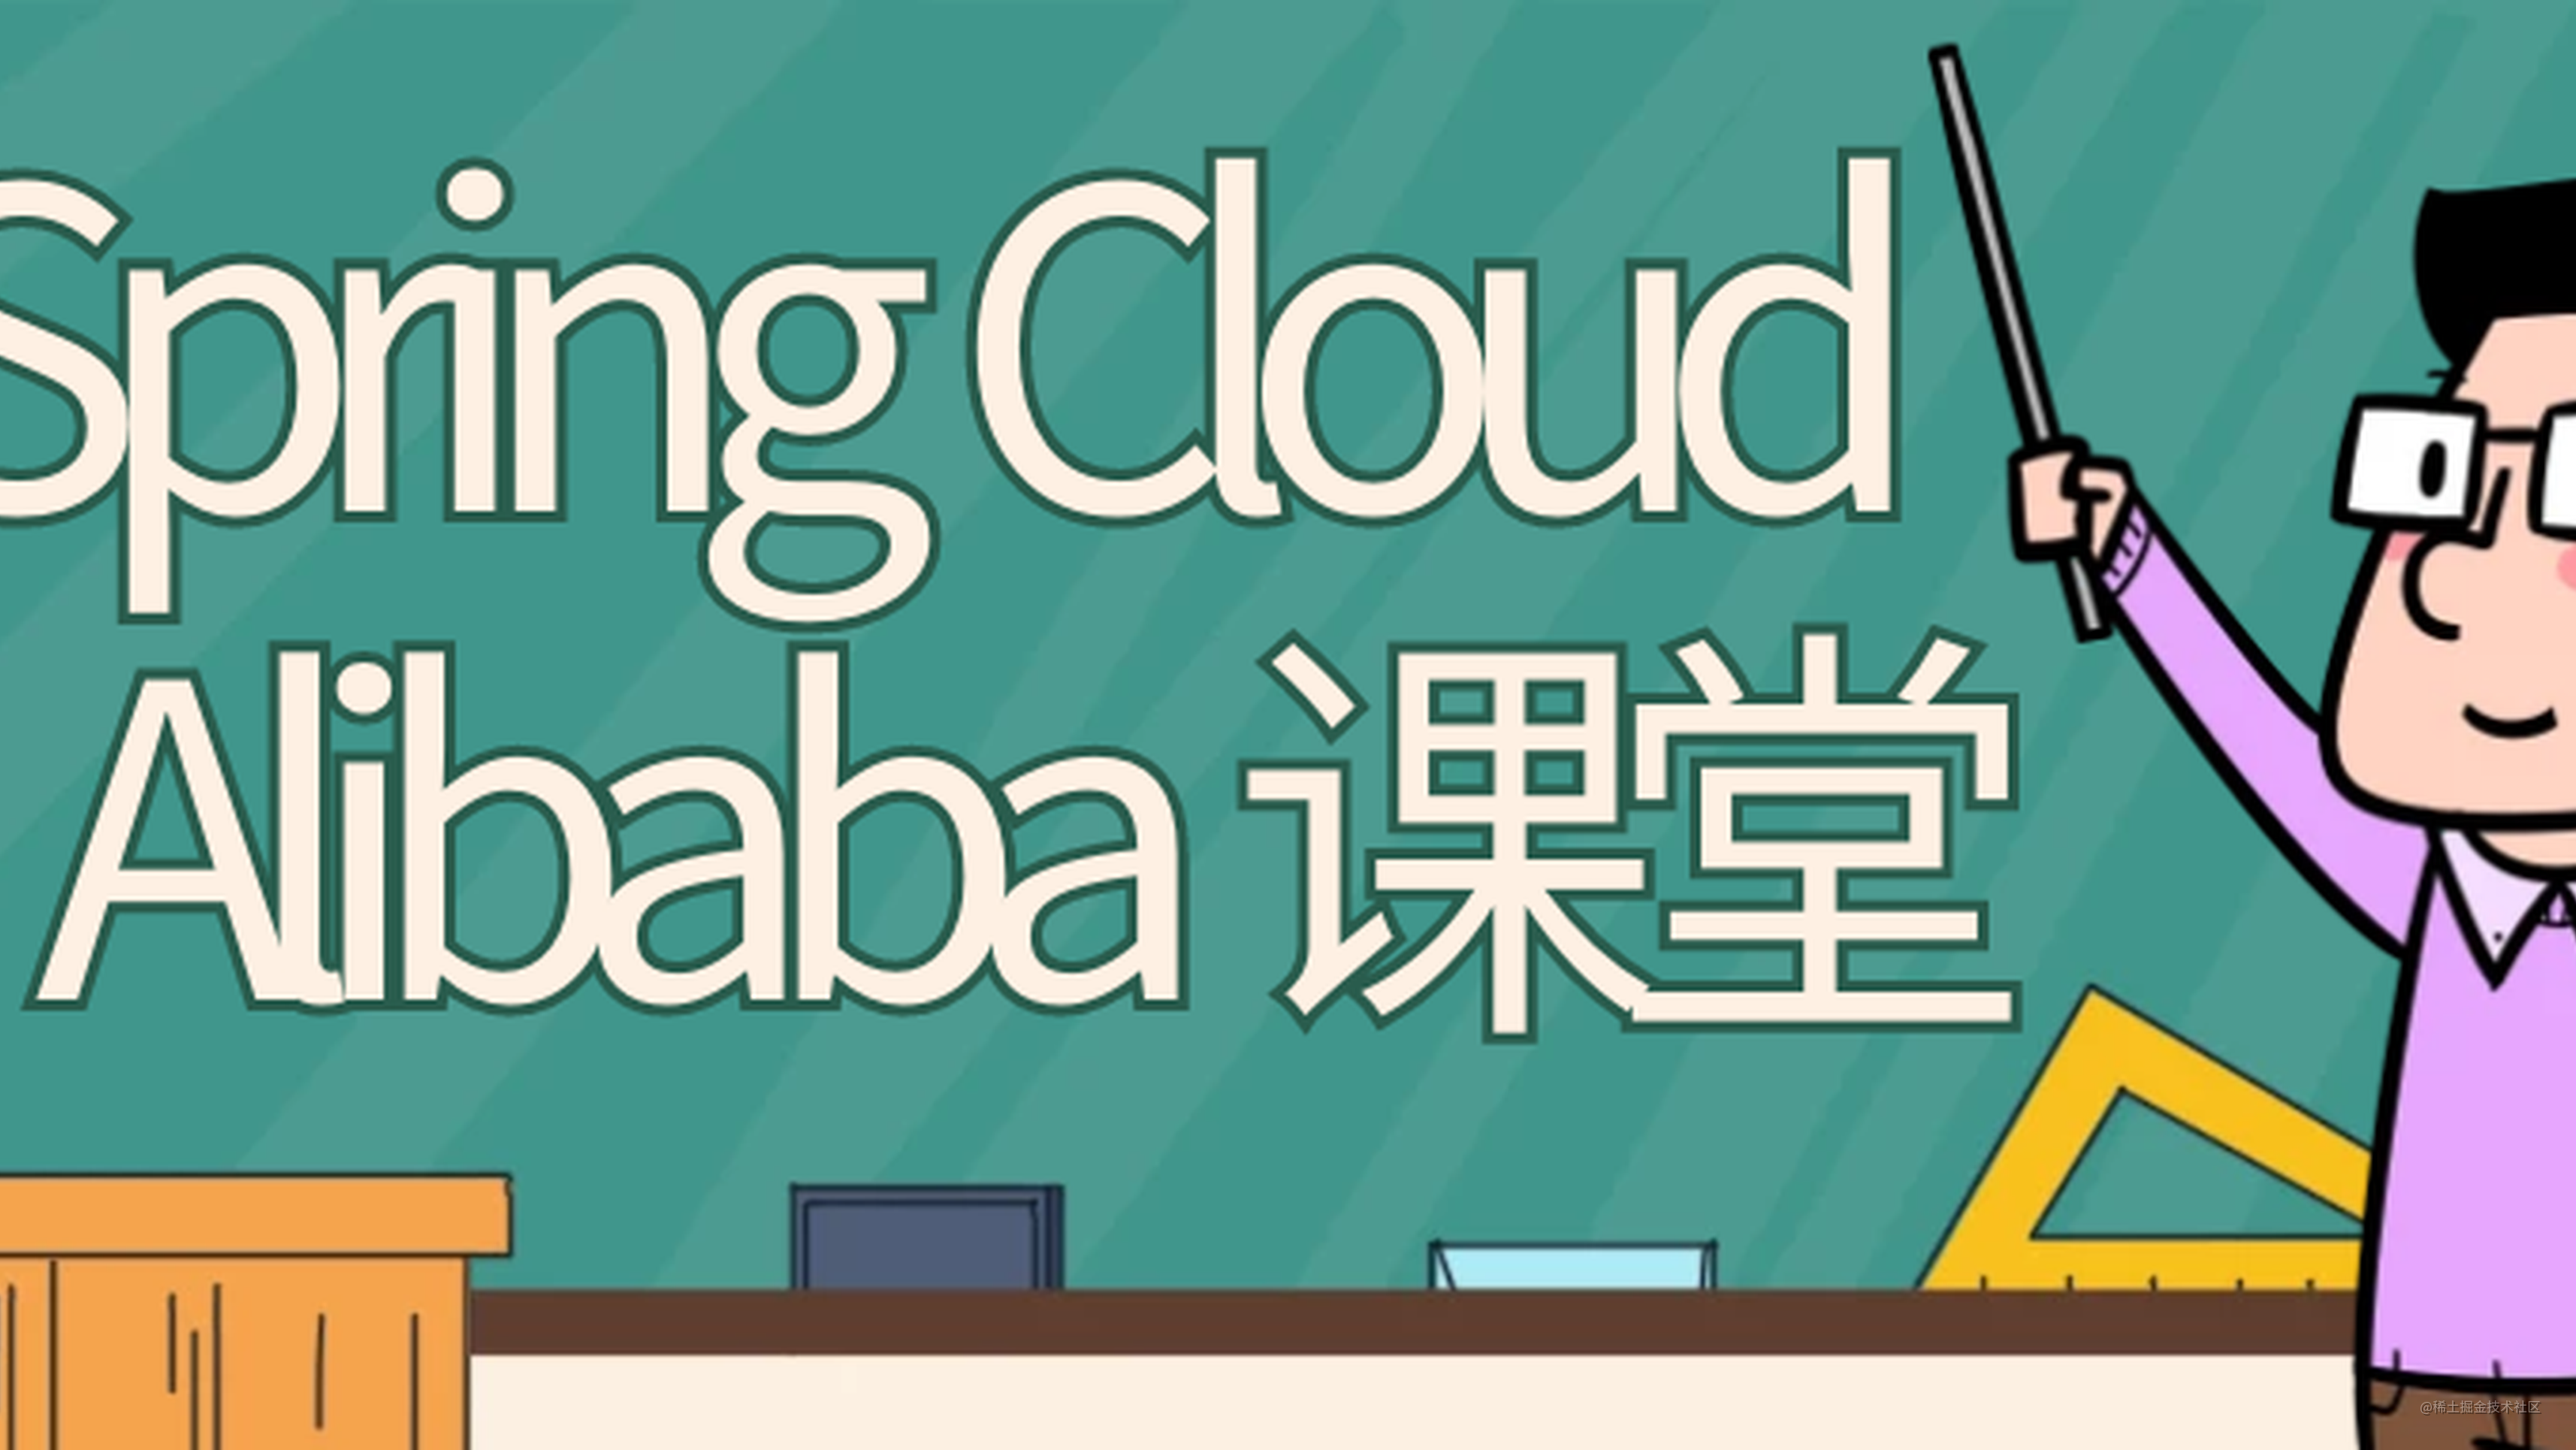 Spring Cloud Alibaba 实战（四）Oauth2篇